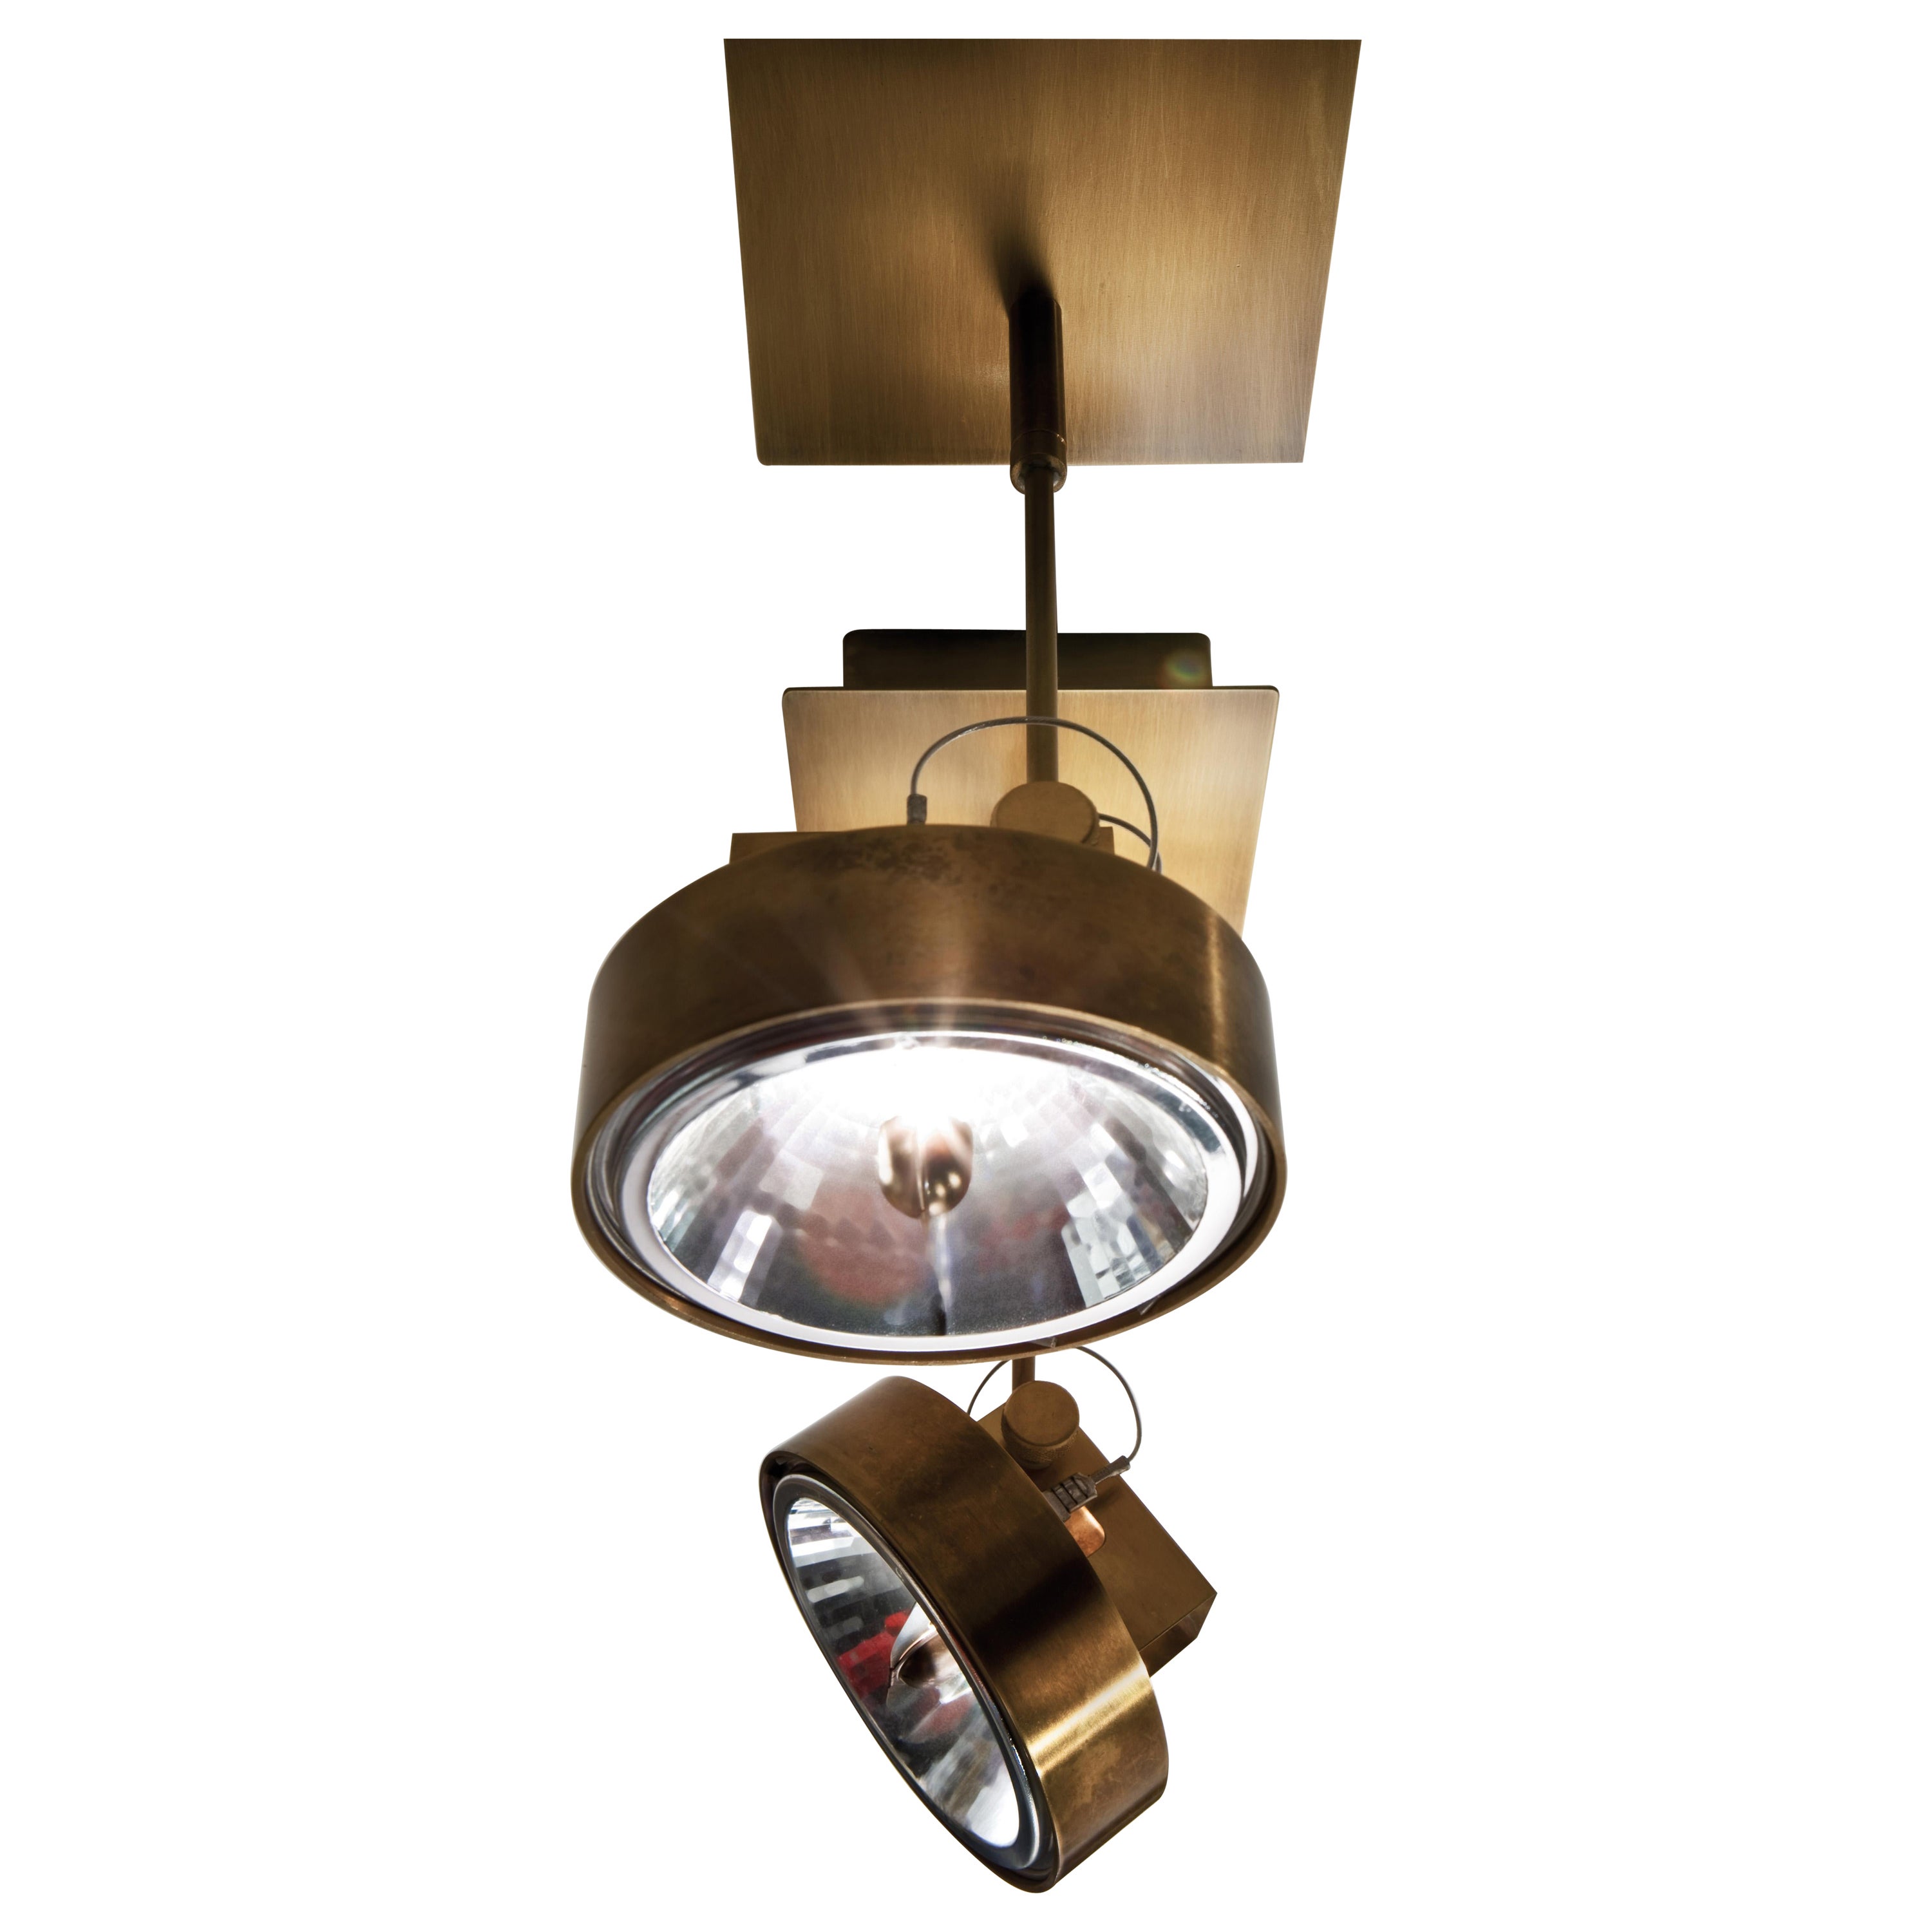 Laurameroni "Work Light Dark" LED Spotlight for Ceiling or Wall by M. Anderson